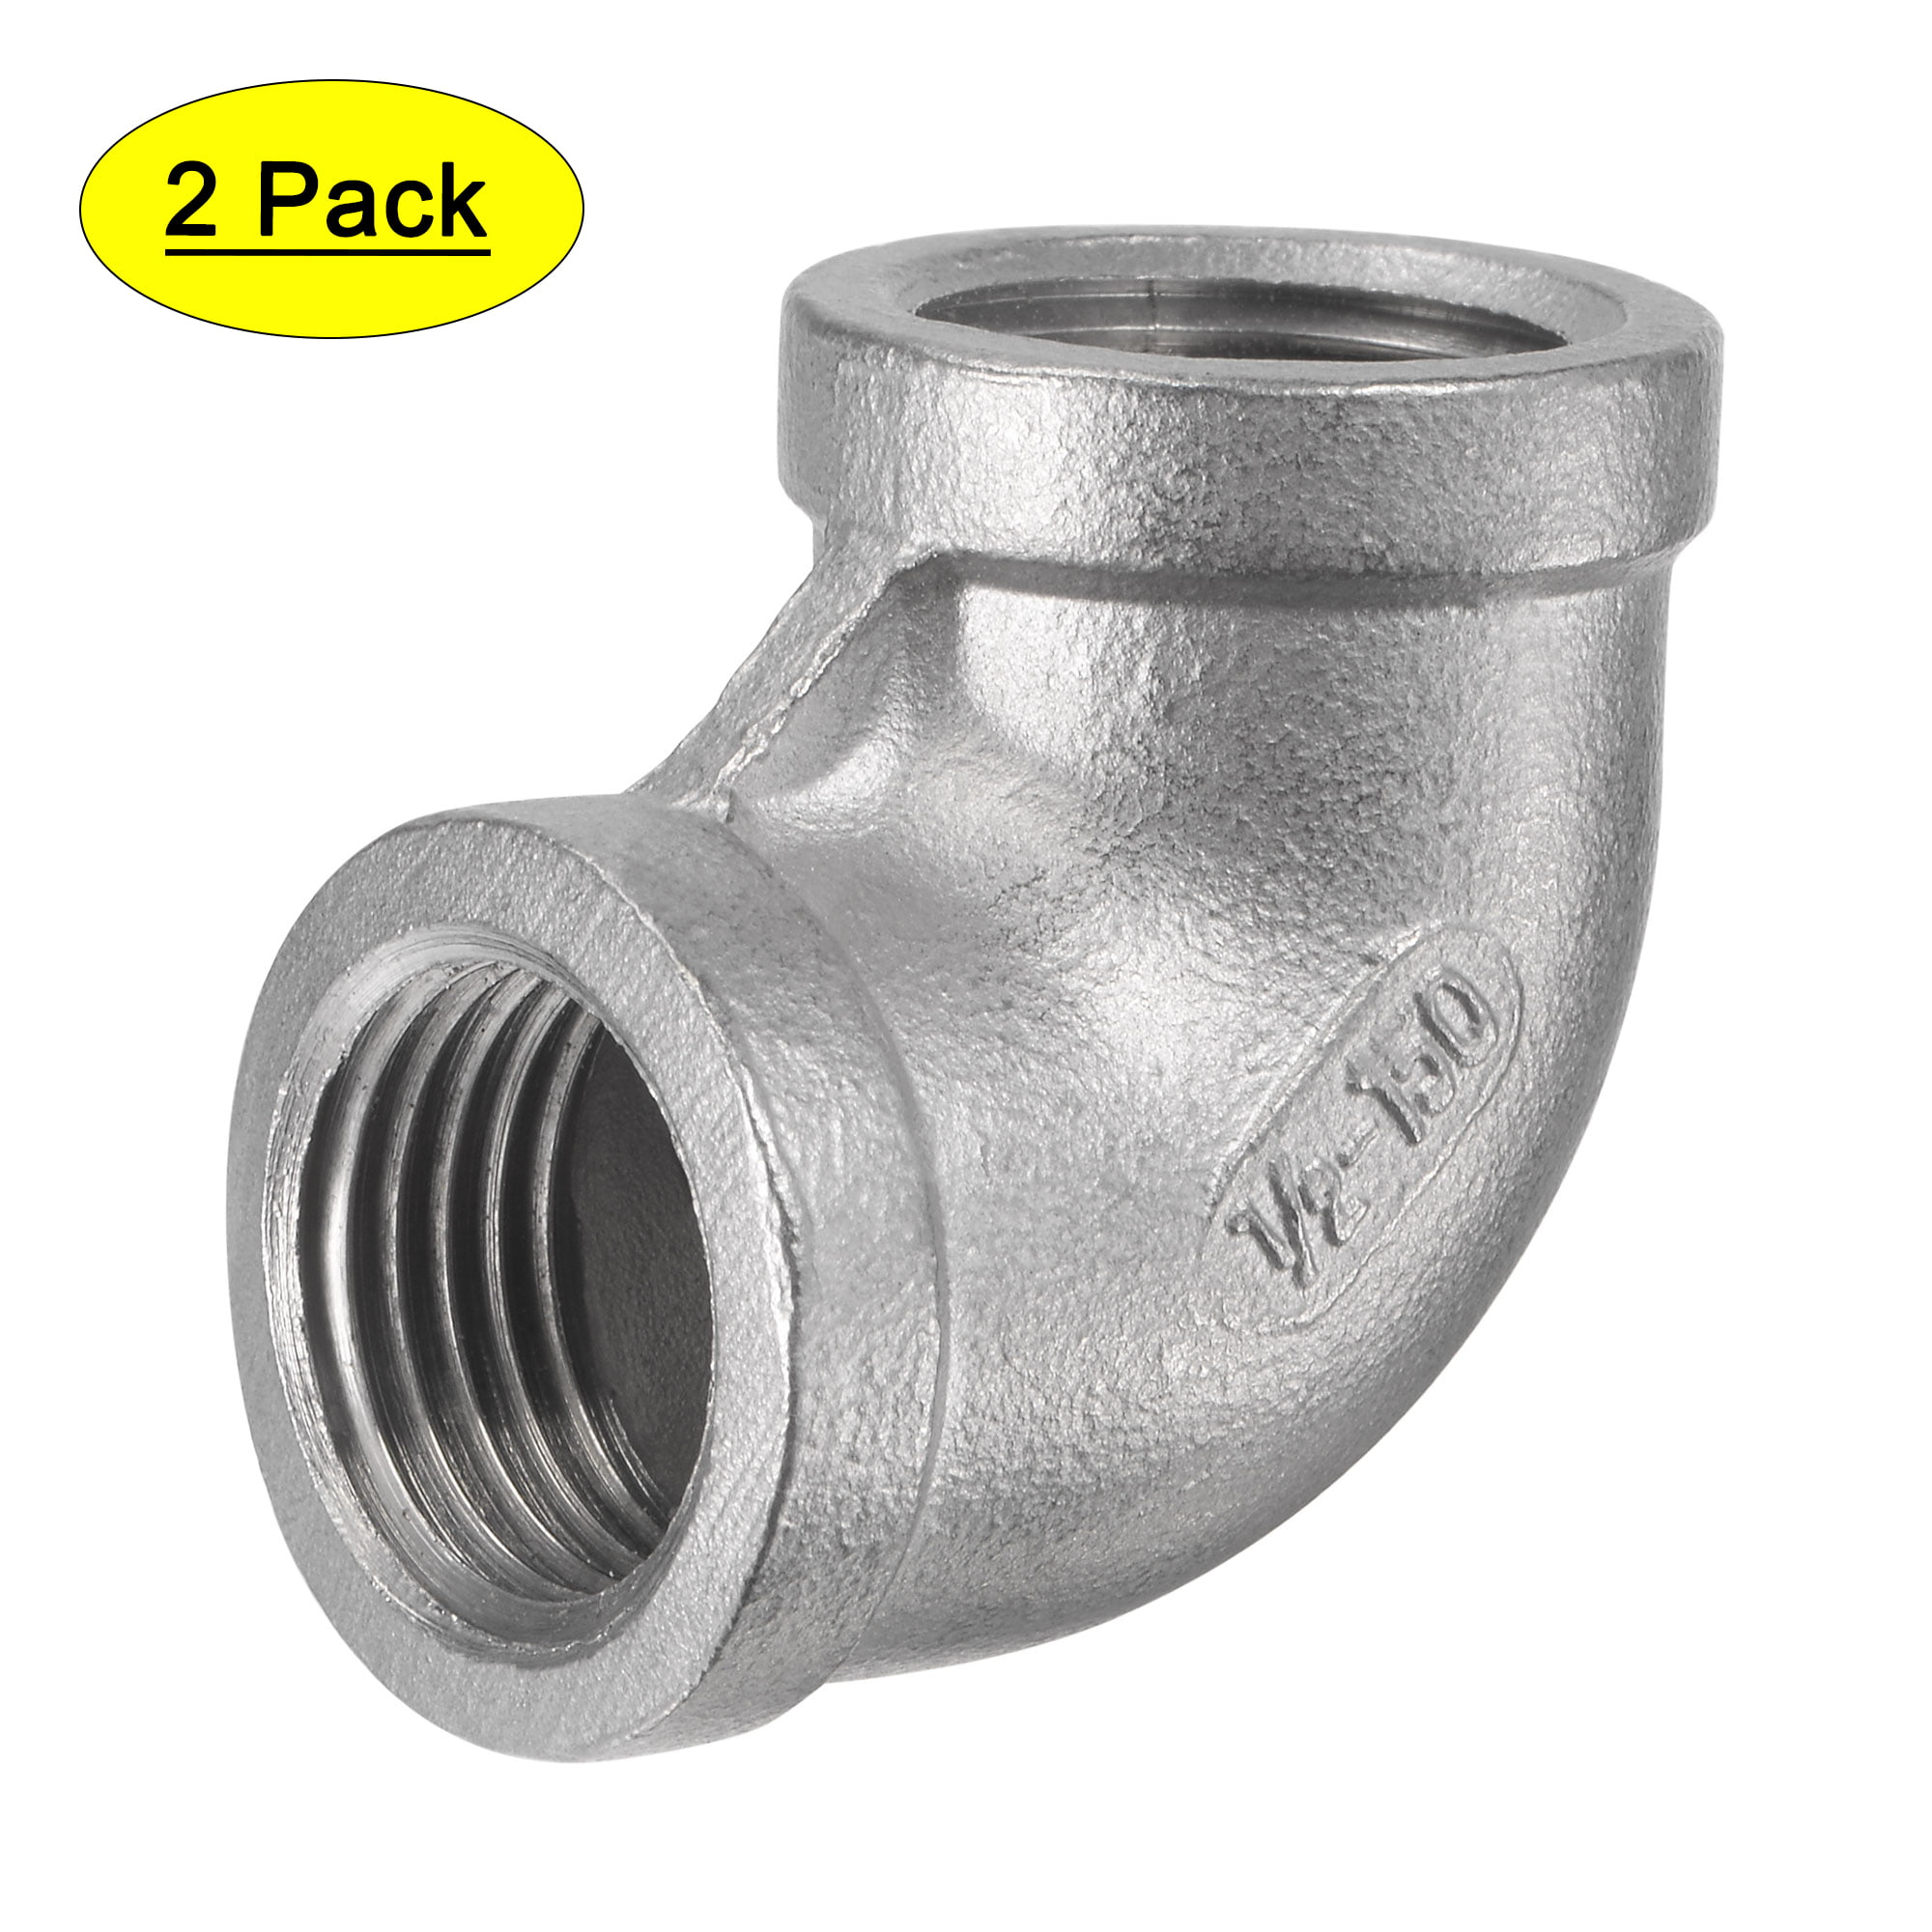 Female x Female NPT Thread 1" Pipe Fitting 304 Stainless Steel Elbow 90 Degree 